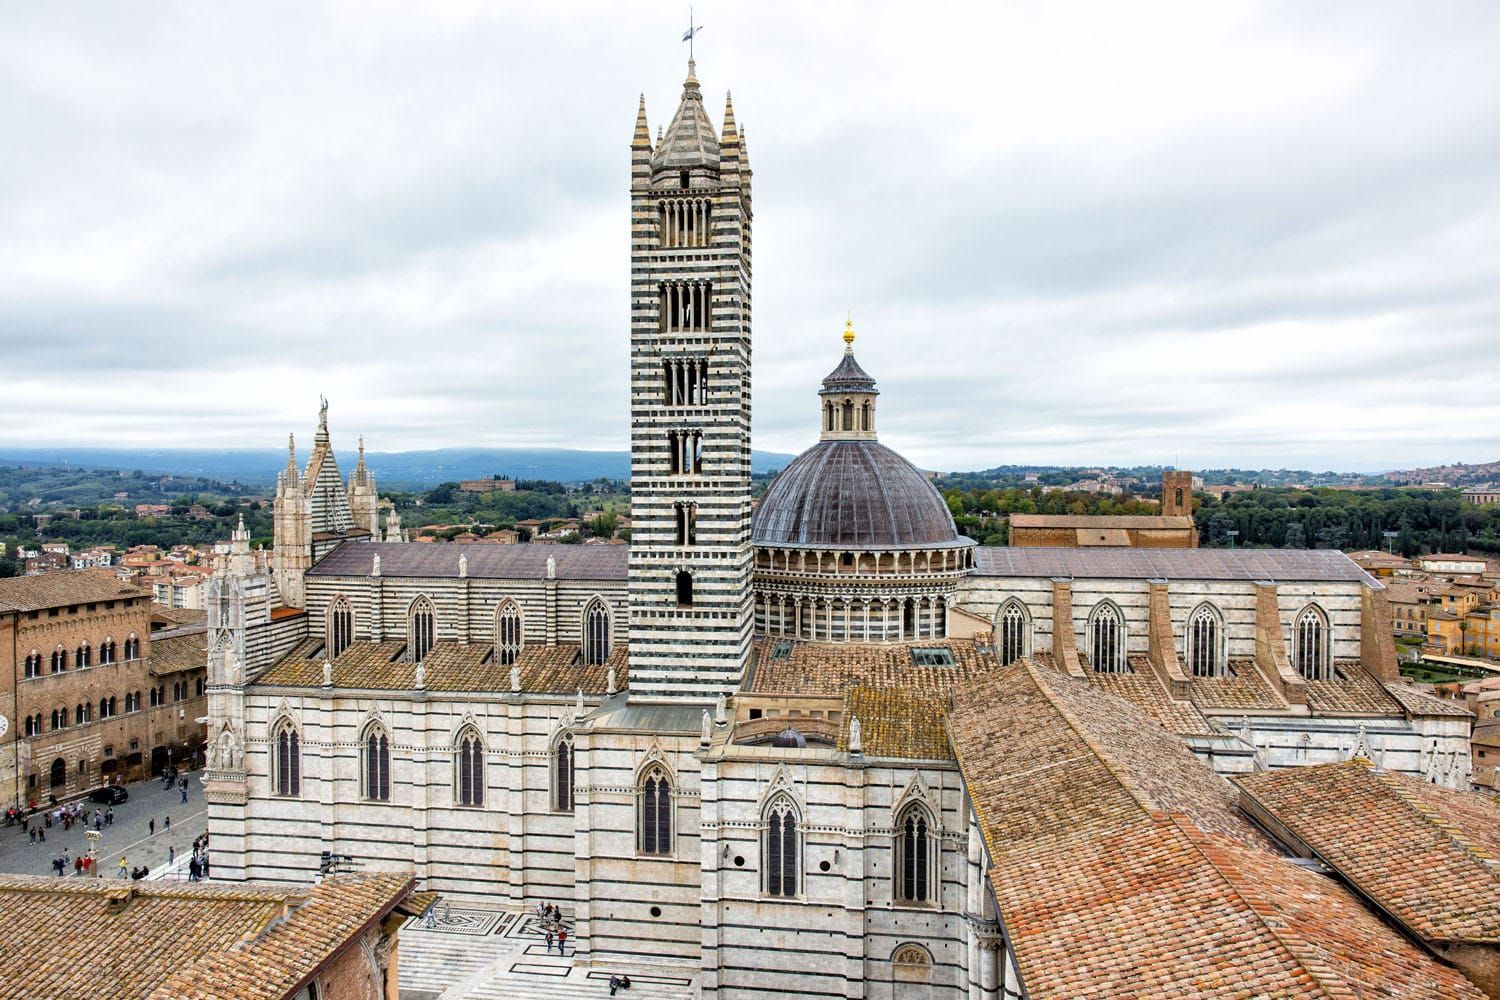 View of the Siena Cathedral